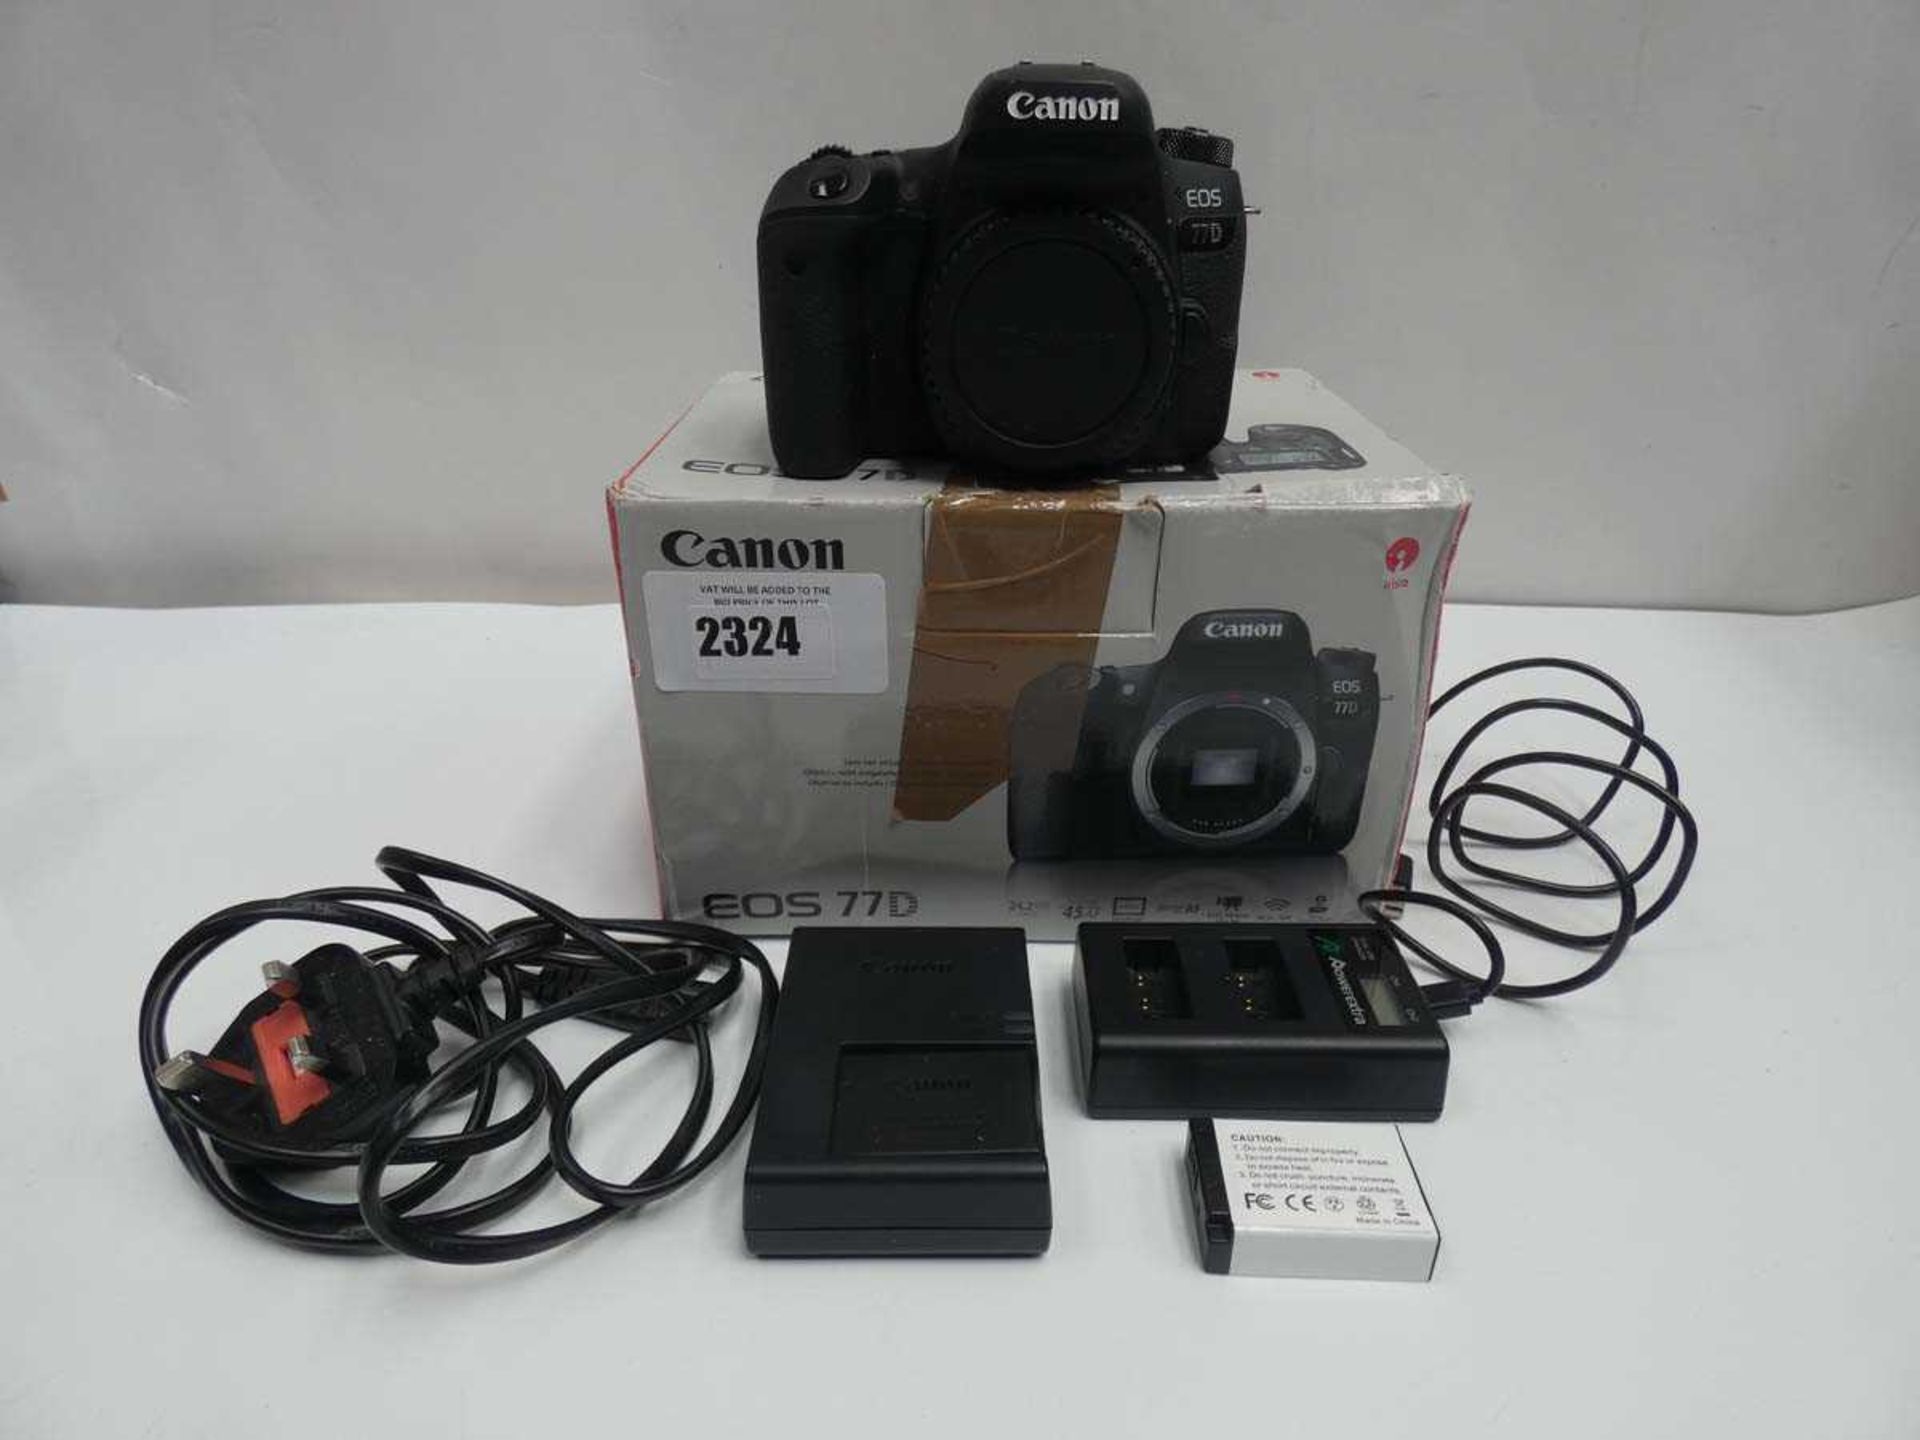 +VAT Canon EOS 77D SLR digital camera body, batteries, charger and box